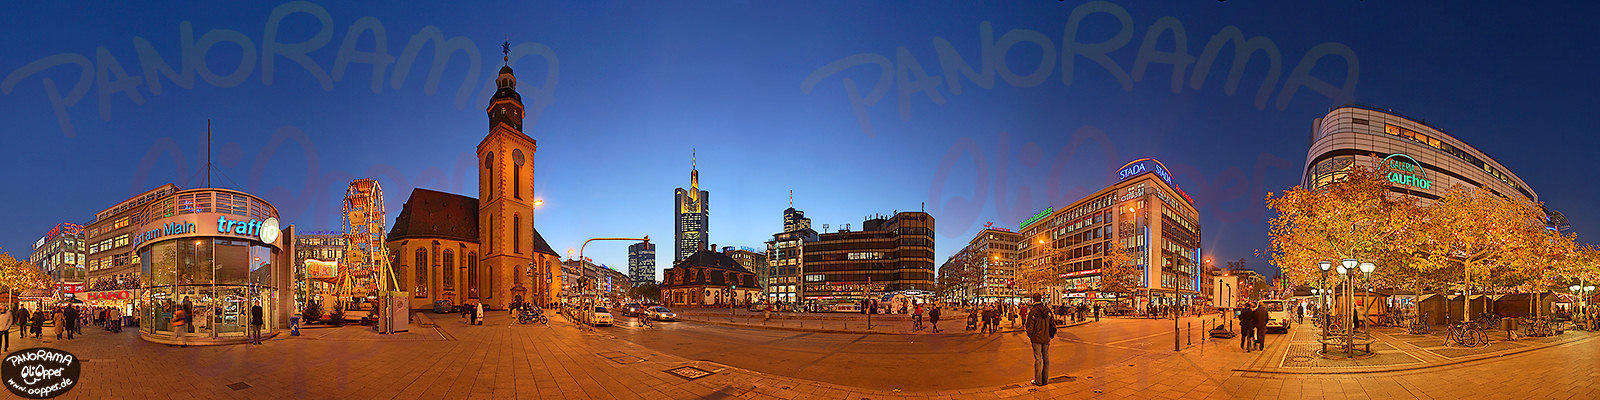 Panorama Frankfurt - Hauptwache - p100 - (c) by Oliver Opper